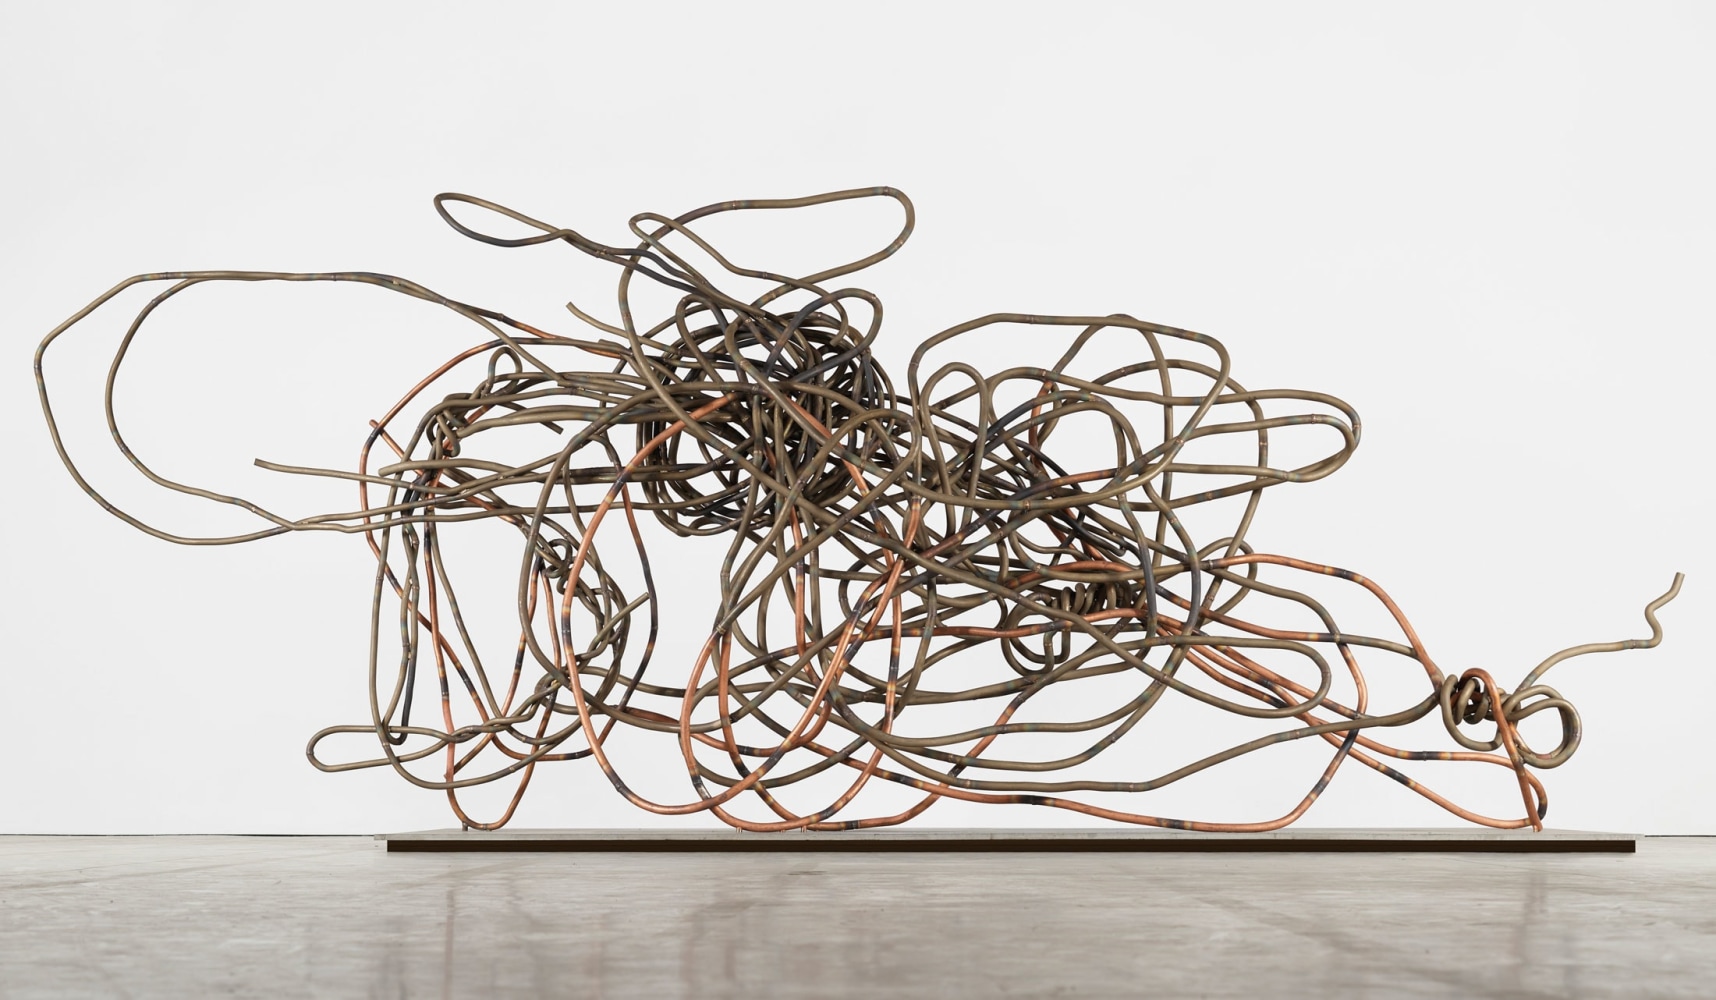 Christopher Wool
Untitled, 2018
Bronze and copper plated steel
121 1/2 x 296 x 60 inches
(308.6 x 751.8 x 152.4 cm)